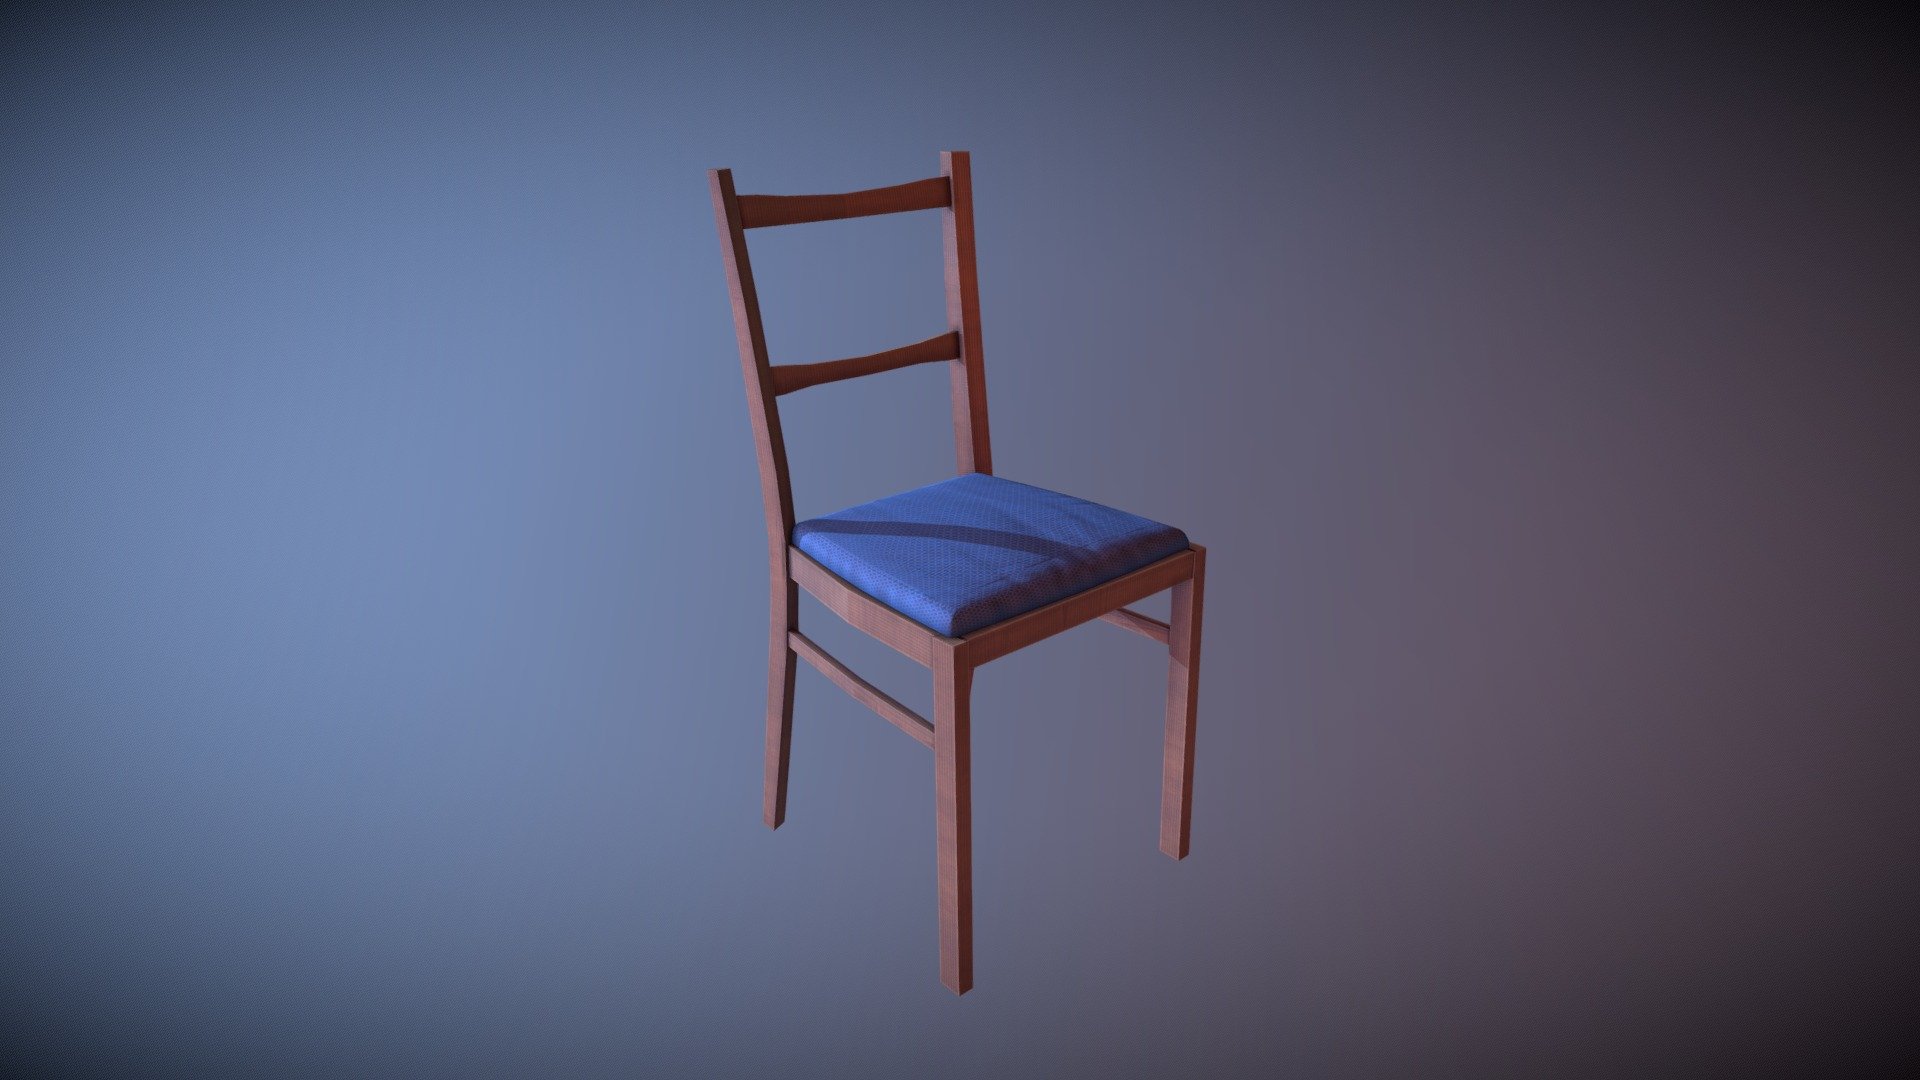 This model was built on the basis of a chair from the 70s during the Soviet era. You can use it in your projects. With love from Russia) - Chair - Download Free 3D model by ilyafom1 3d model